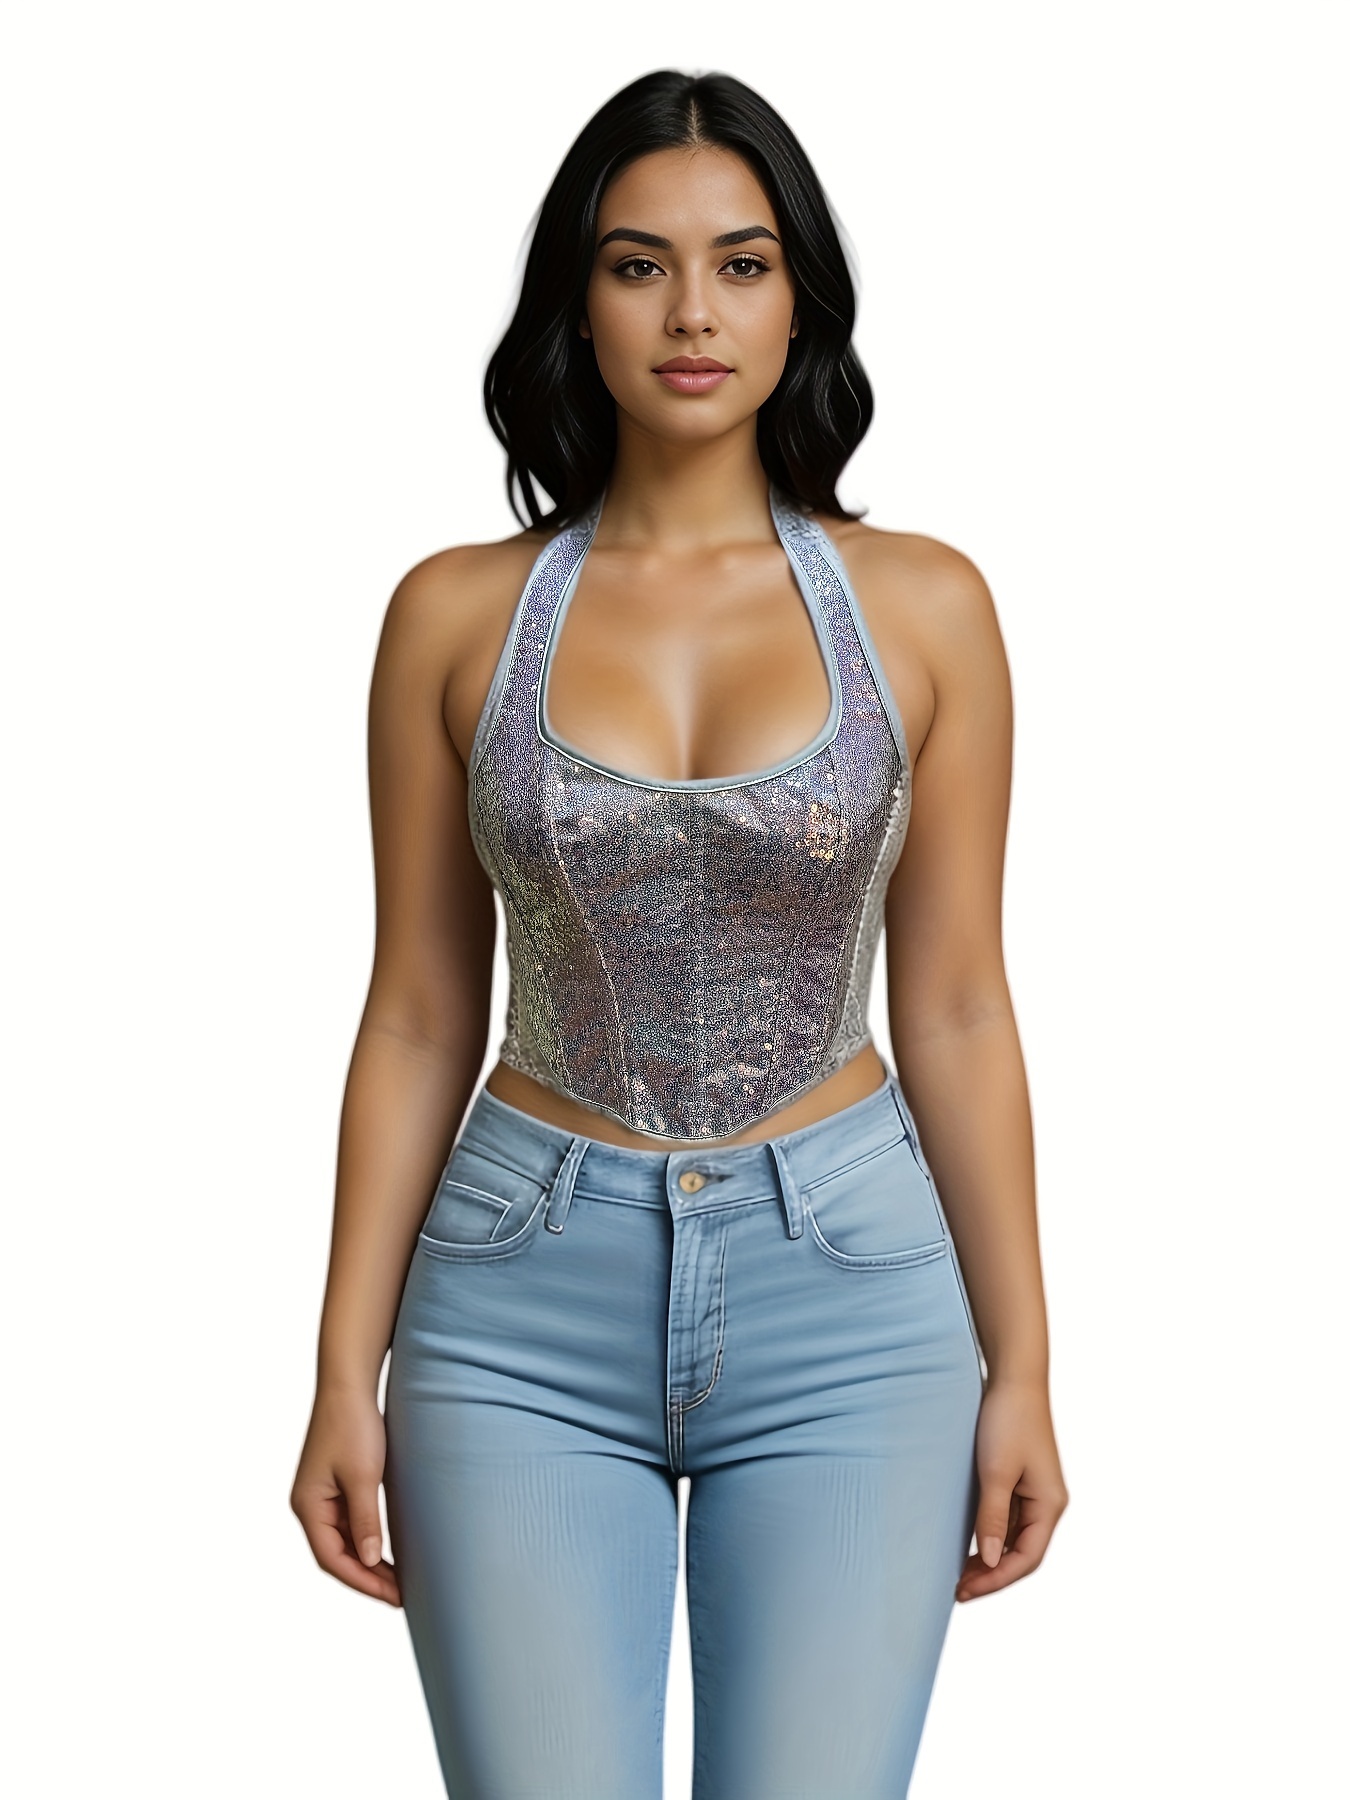 Floral Embroidery Strapless Corset, Mesh Stitching Lace Up Slimmer Body  Shaper, Women's Lingerie & Shapewear